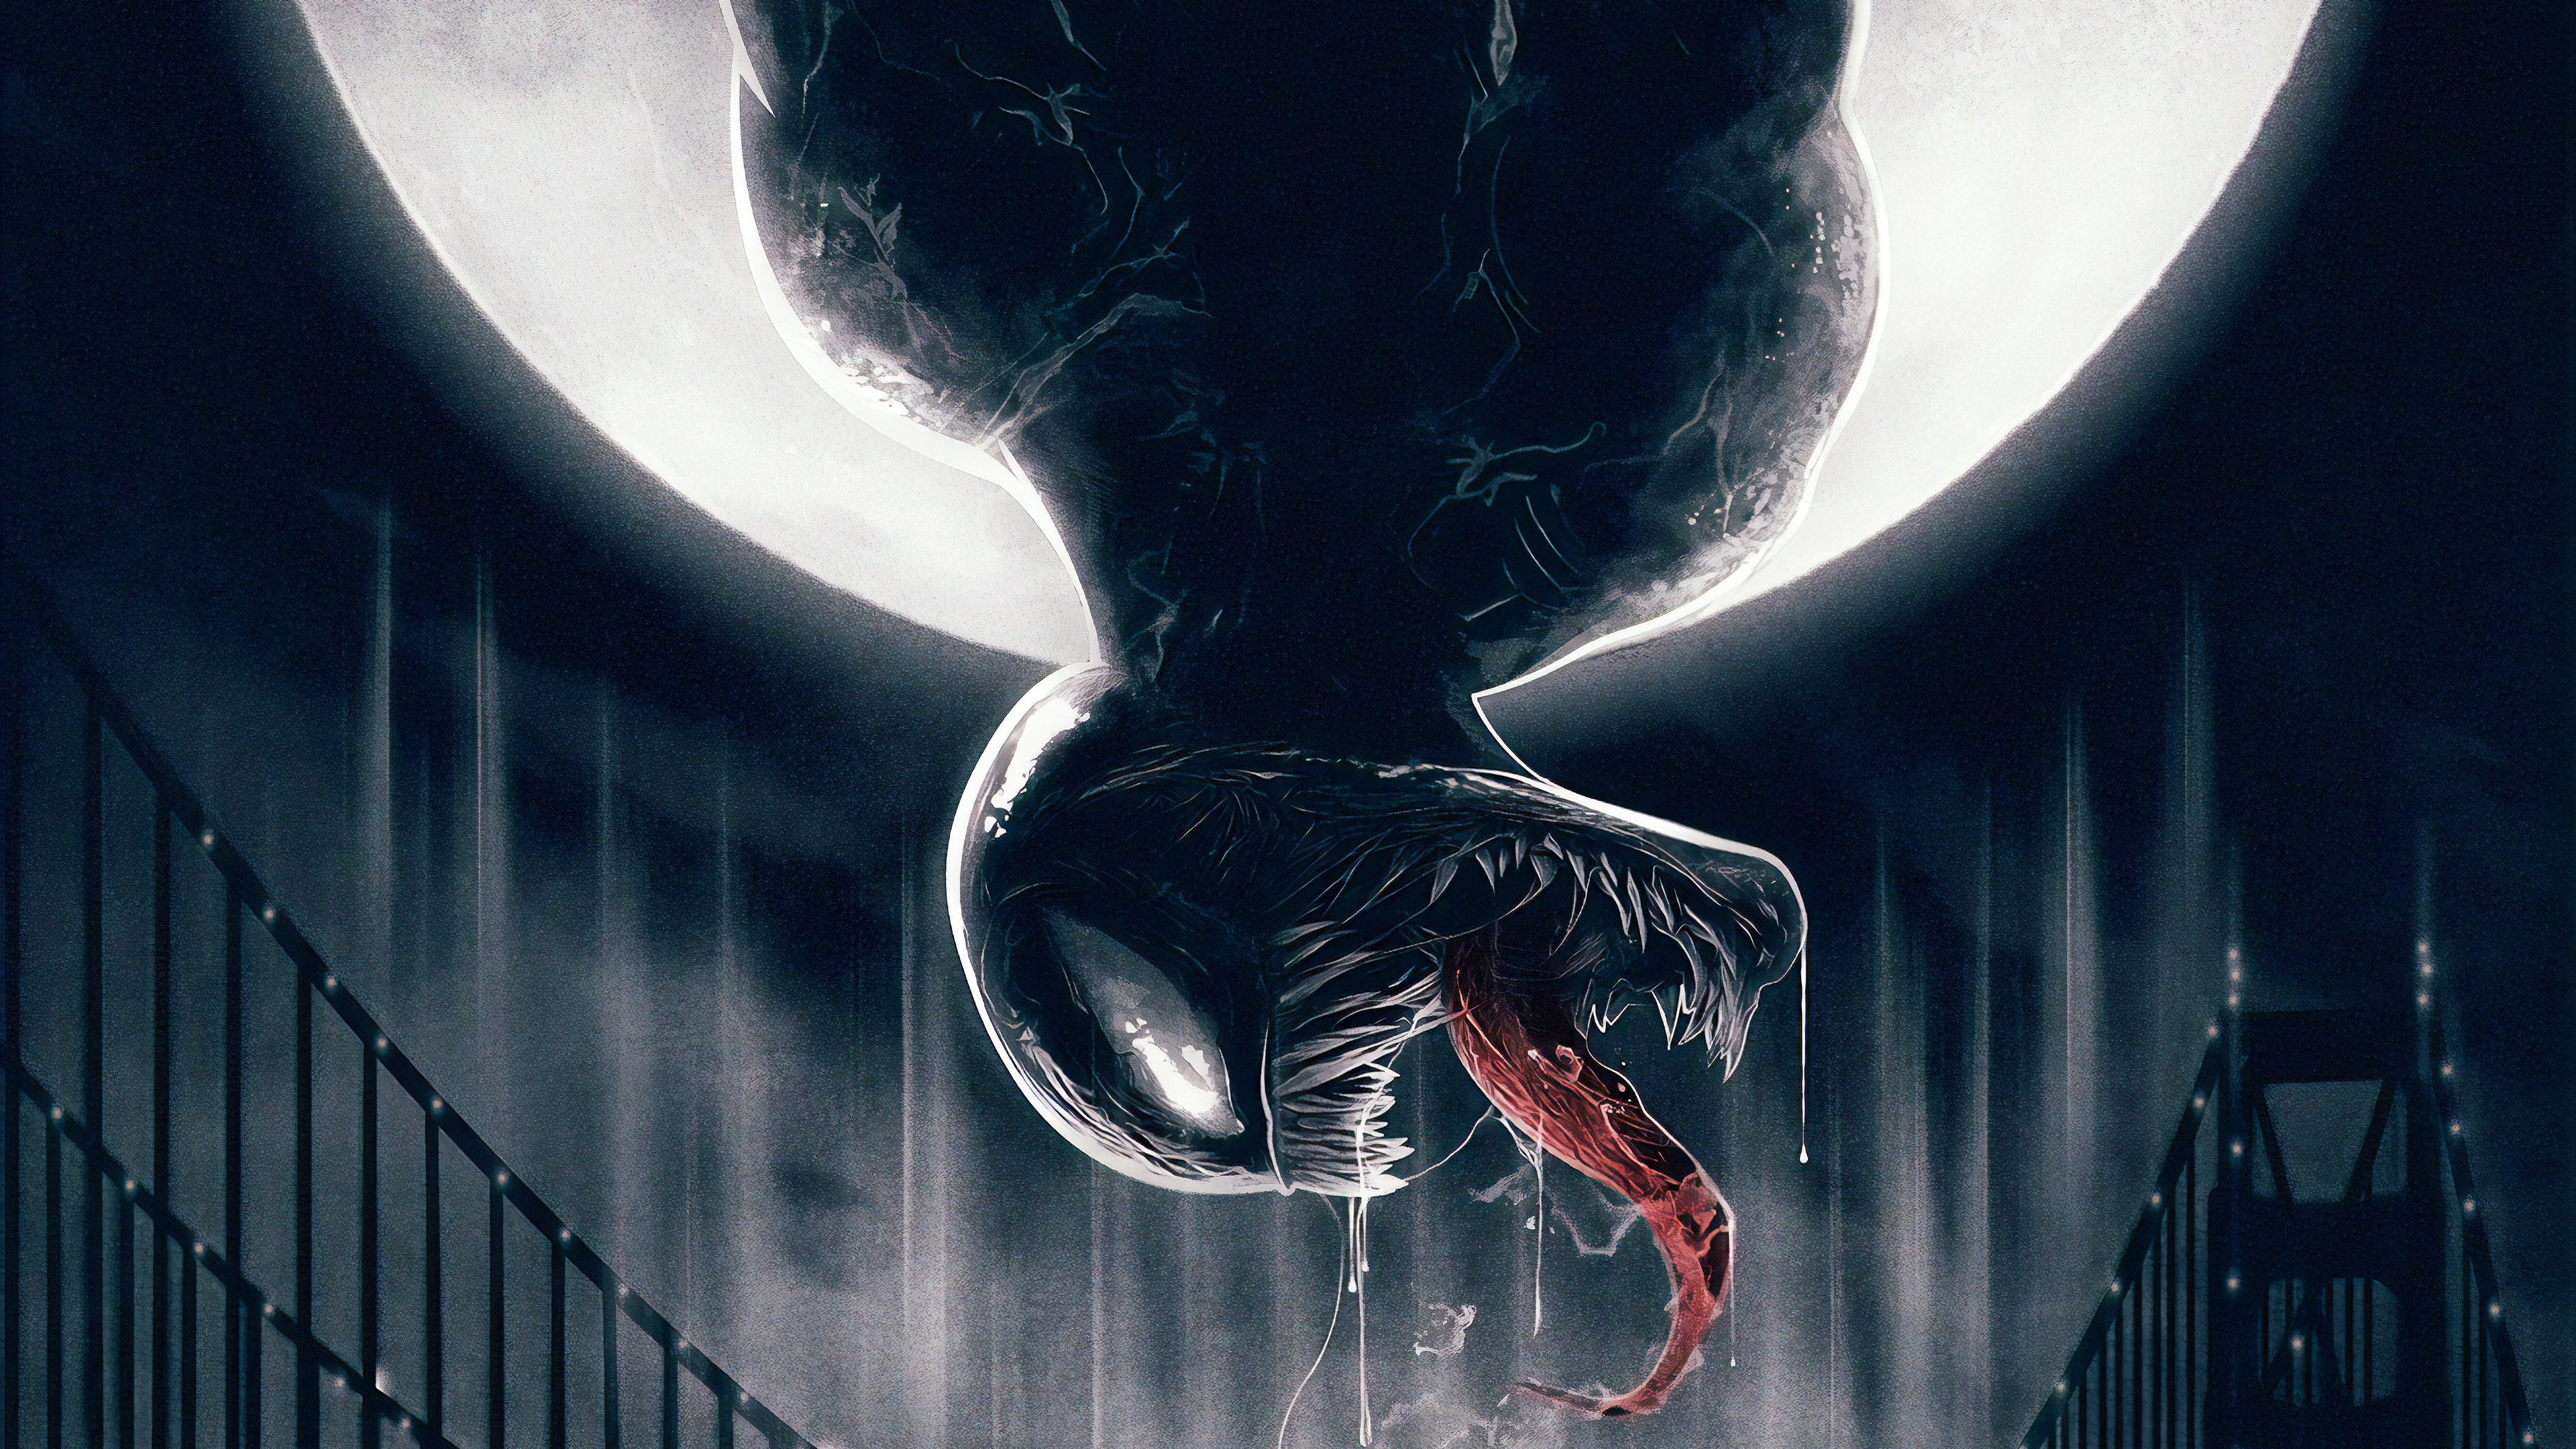 43 Venom Movie Wallpapers HD 4K 5K for PC and Mobile  Download free  images for iPhone Android